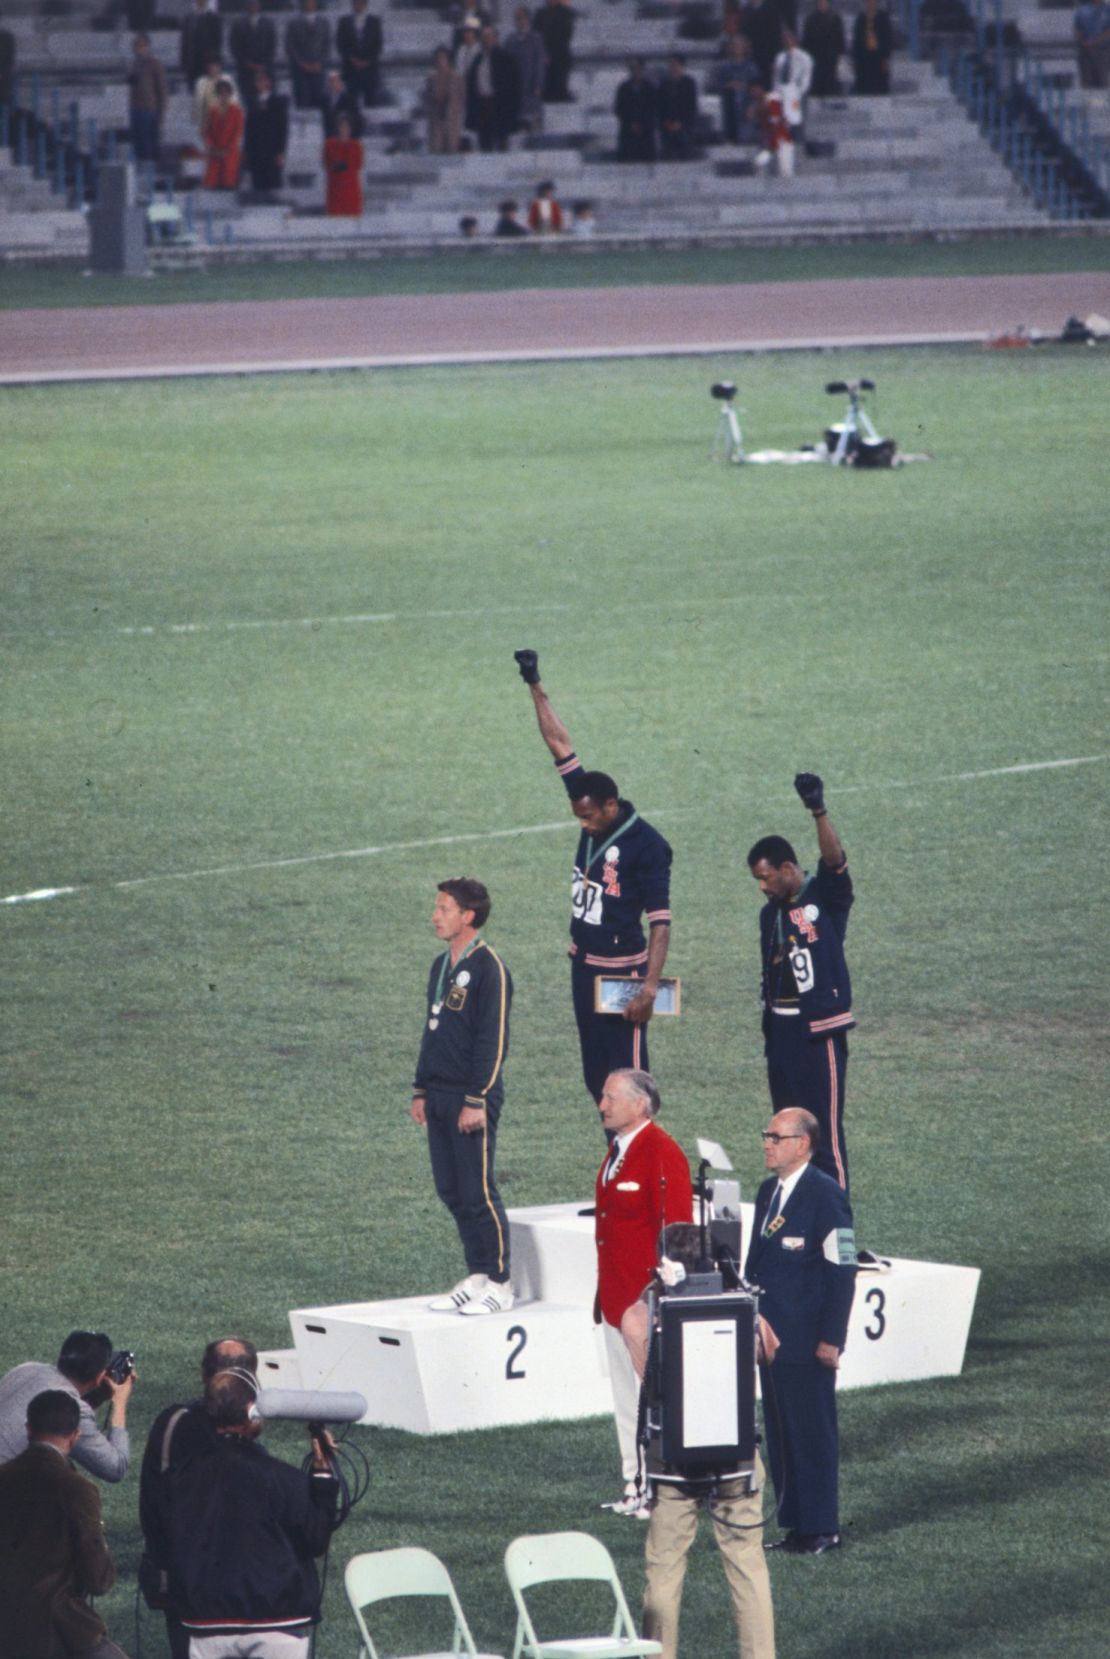 American sprinters Tommie Smith and John Carlos bow their heads and raise gloved fists in protest at the 1968 Olympics in Mexico City.